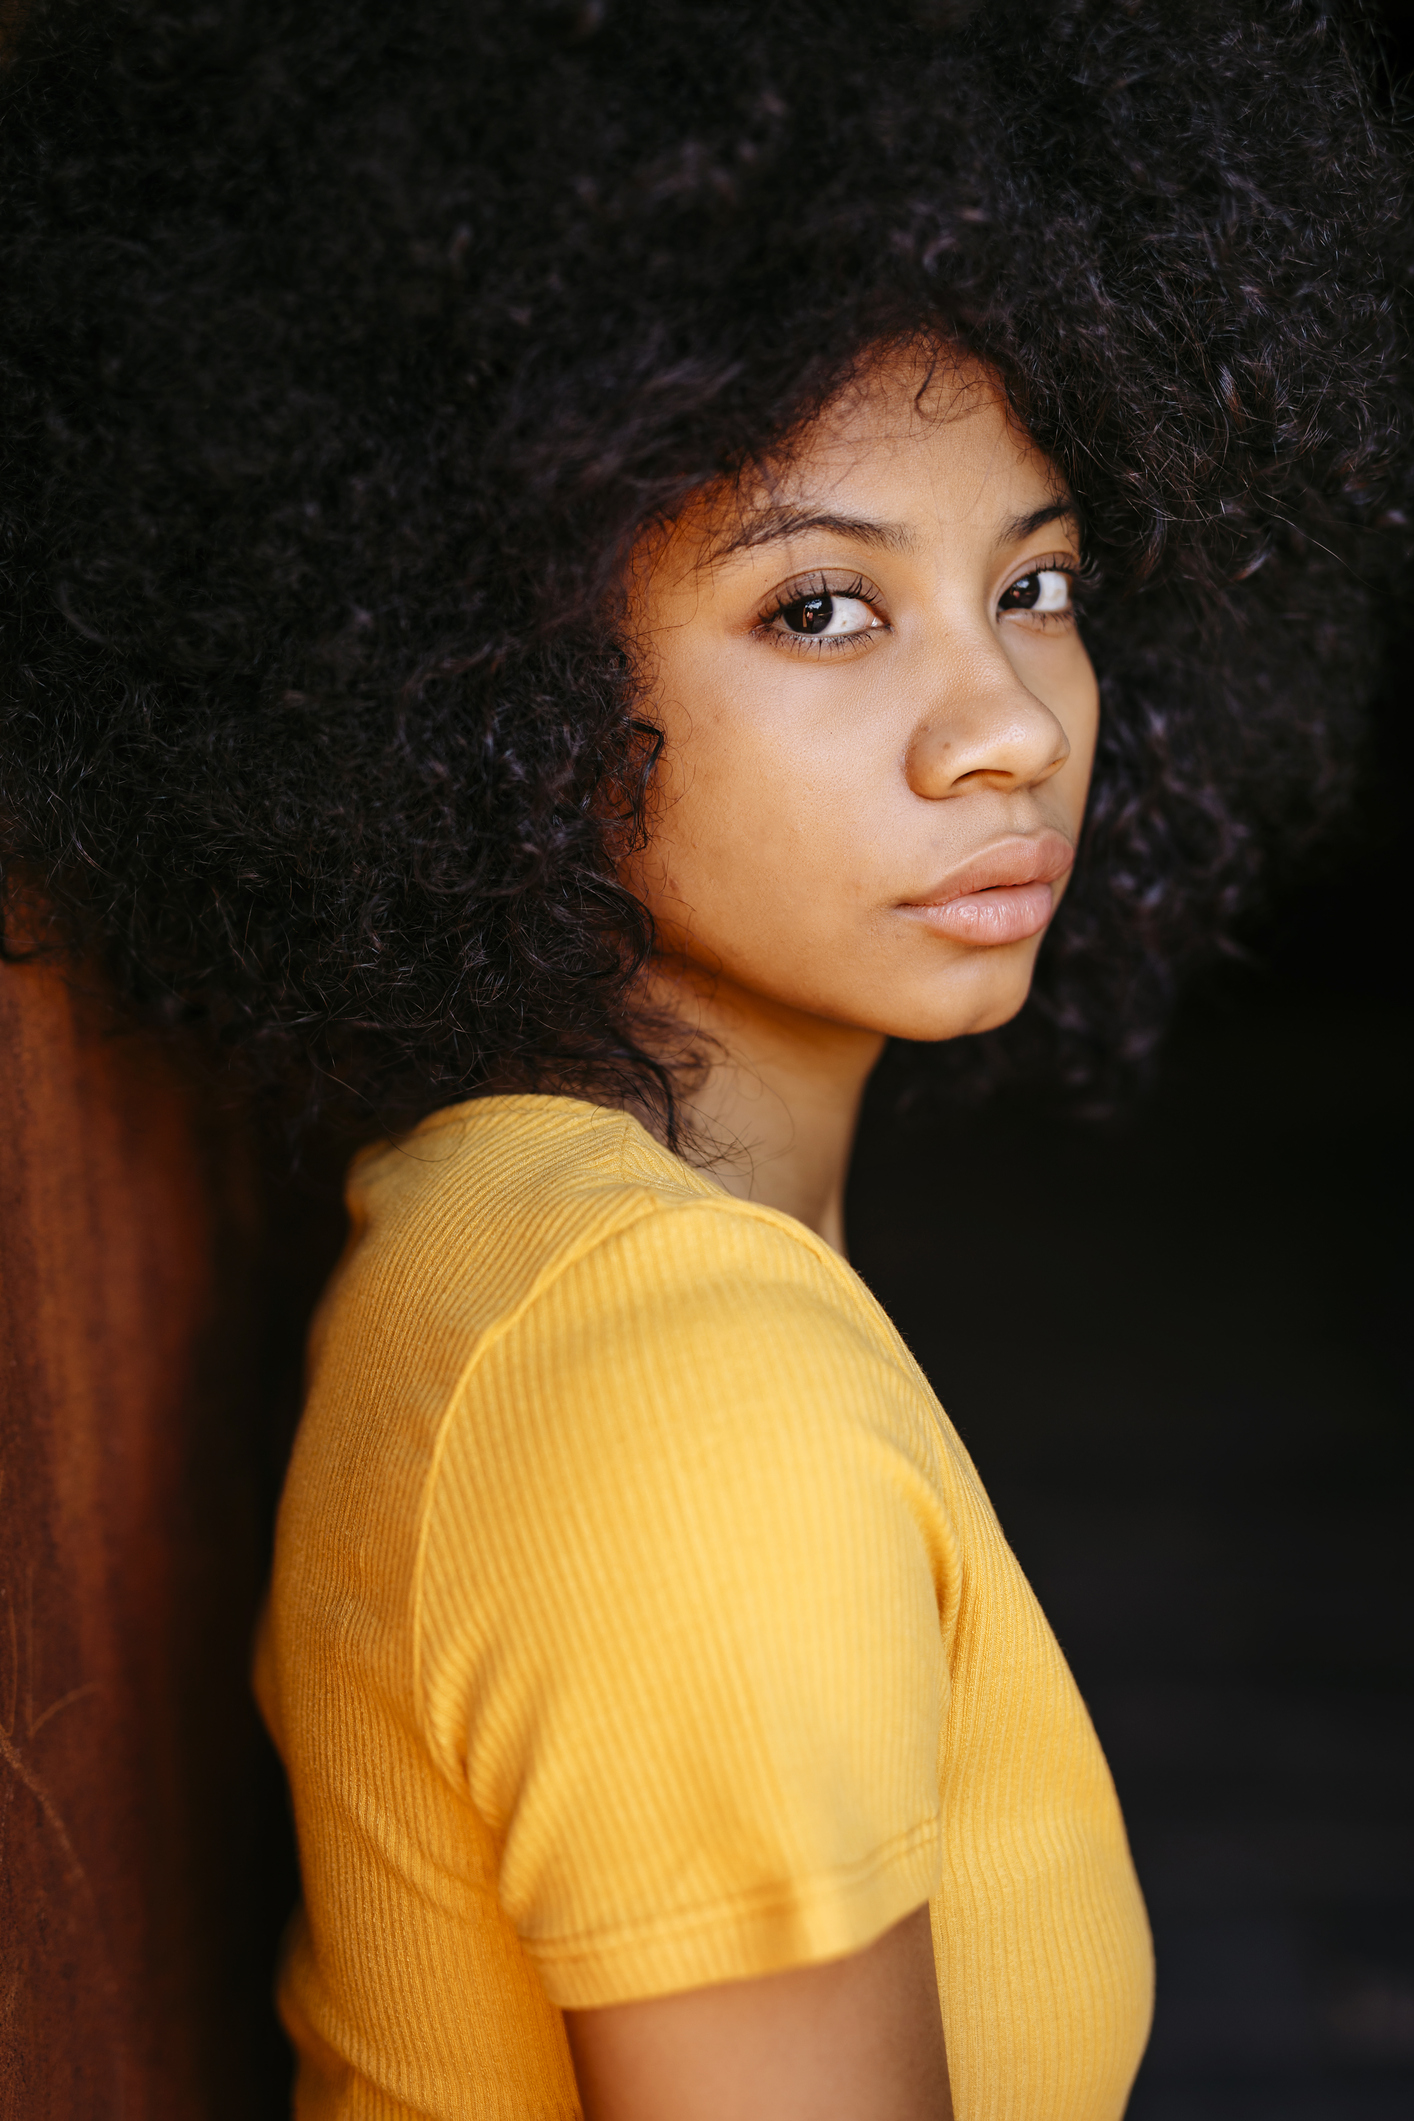 Portrait of young woman in yellow shirt